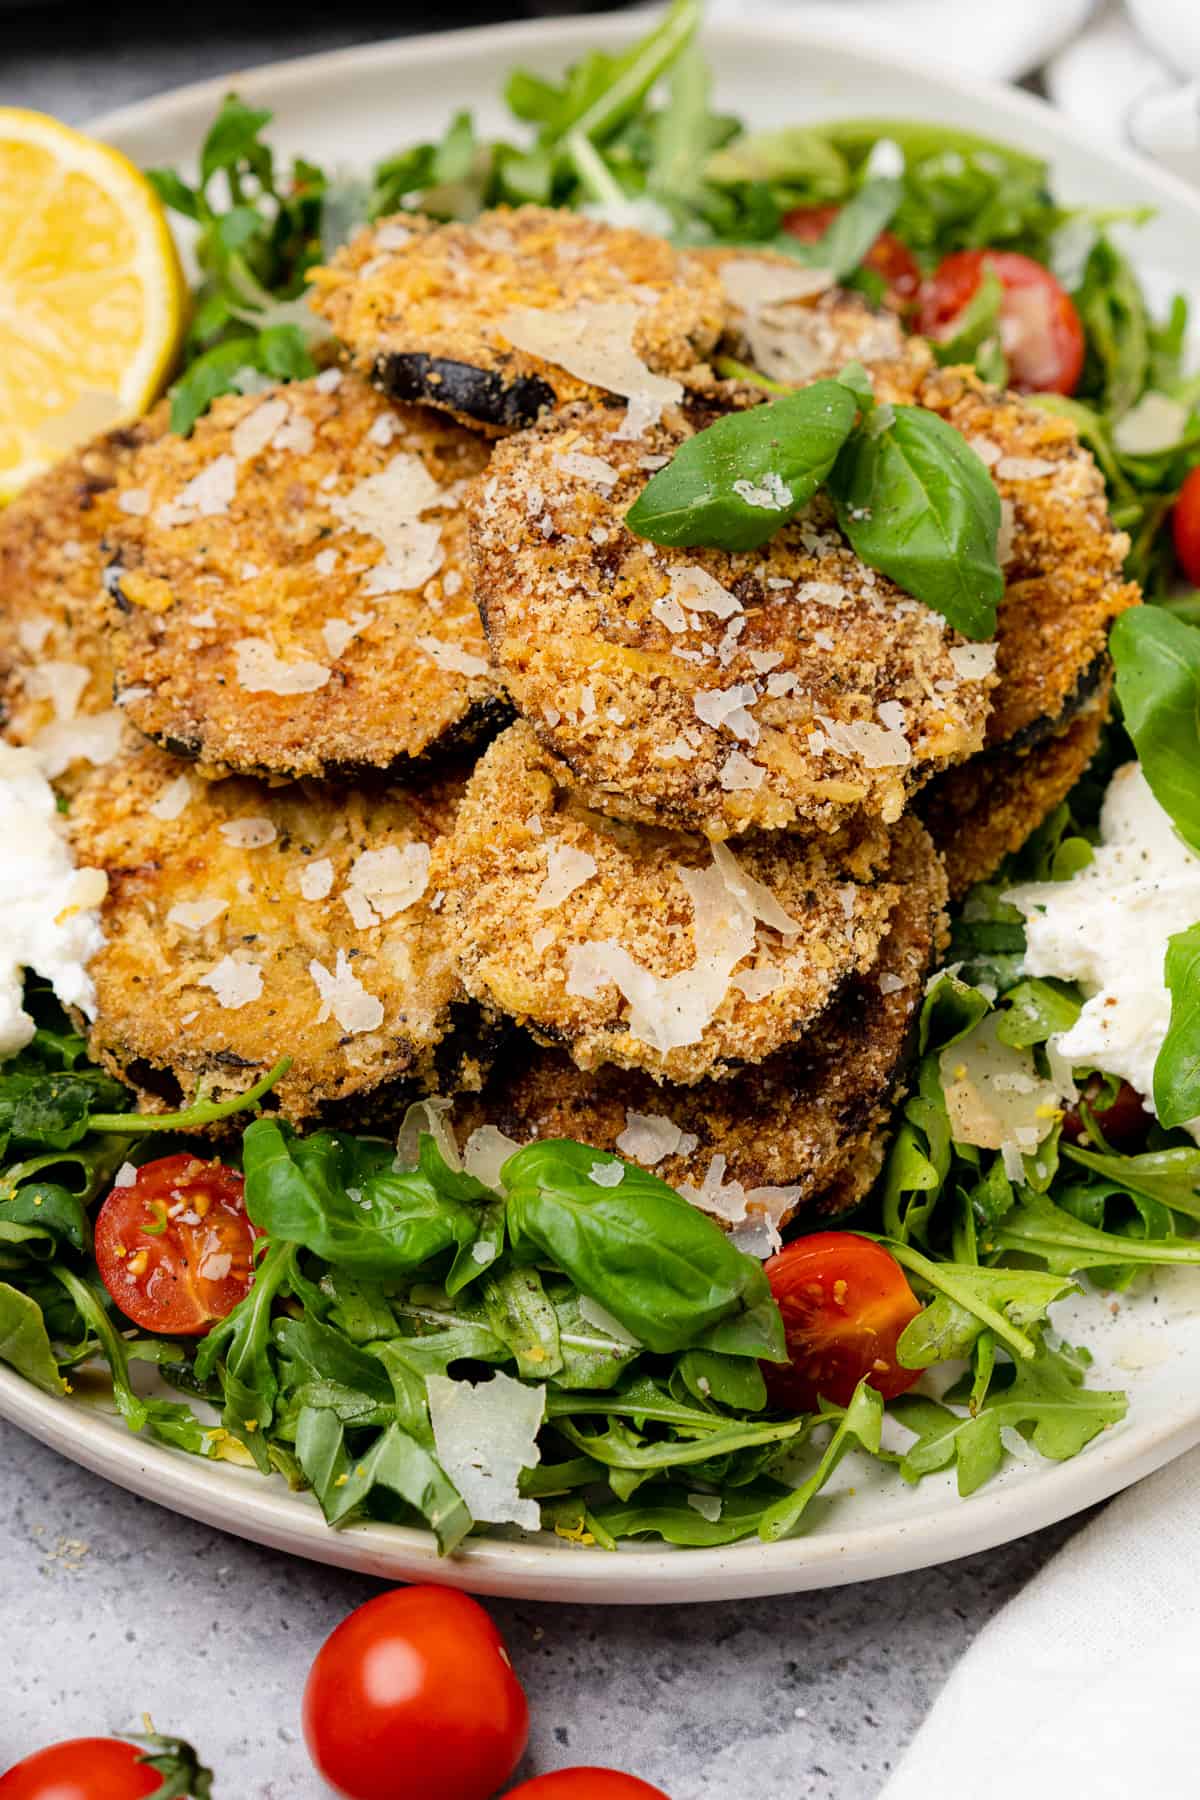 eggplant milanese with ricotta and an arugula salad